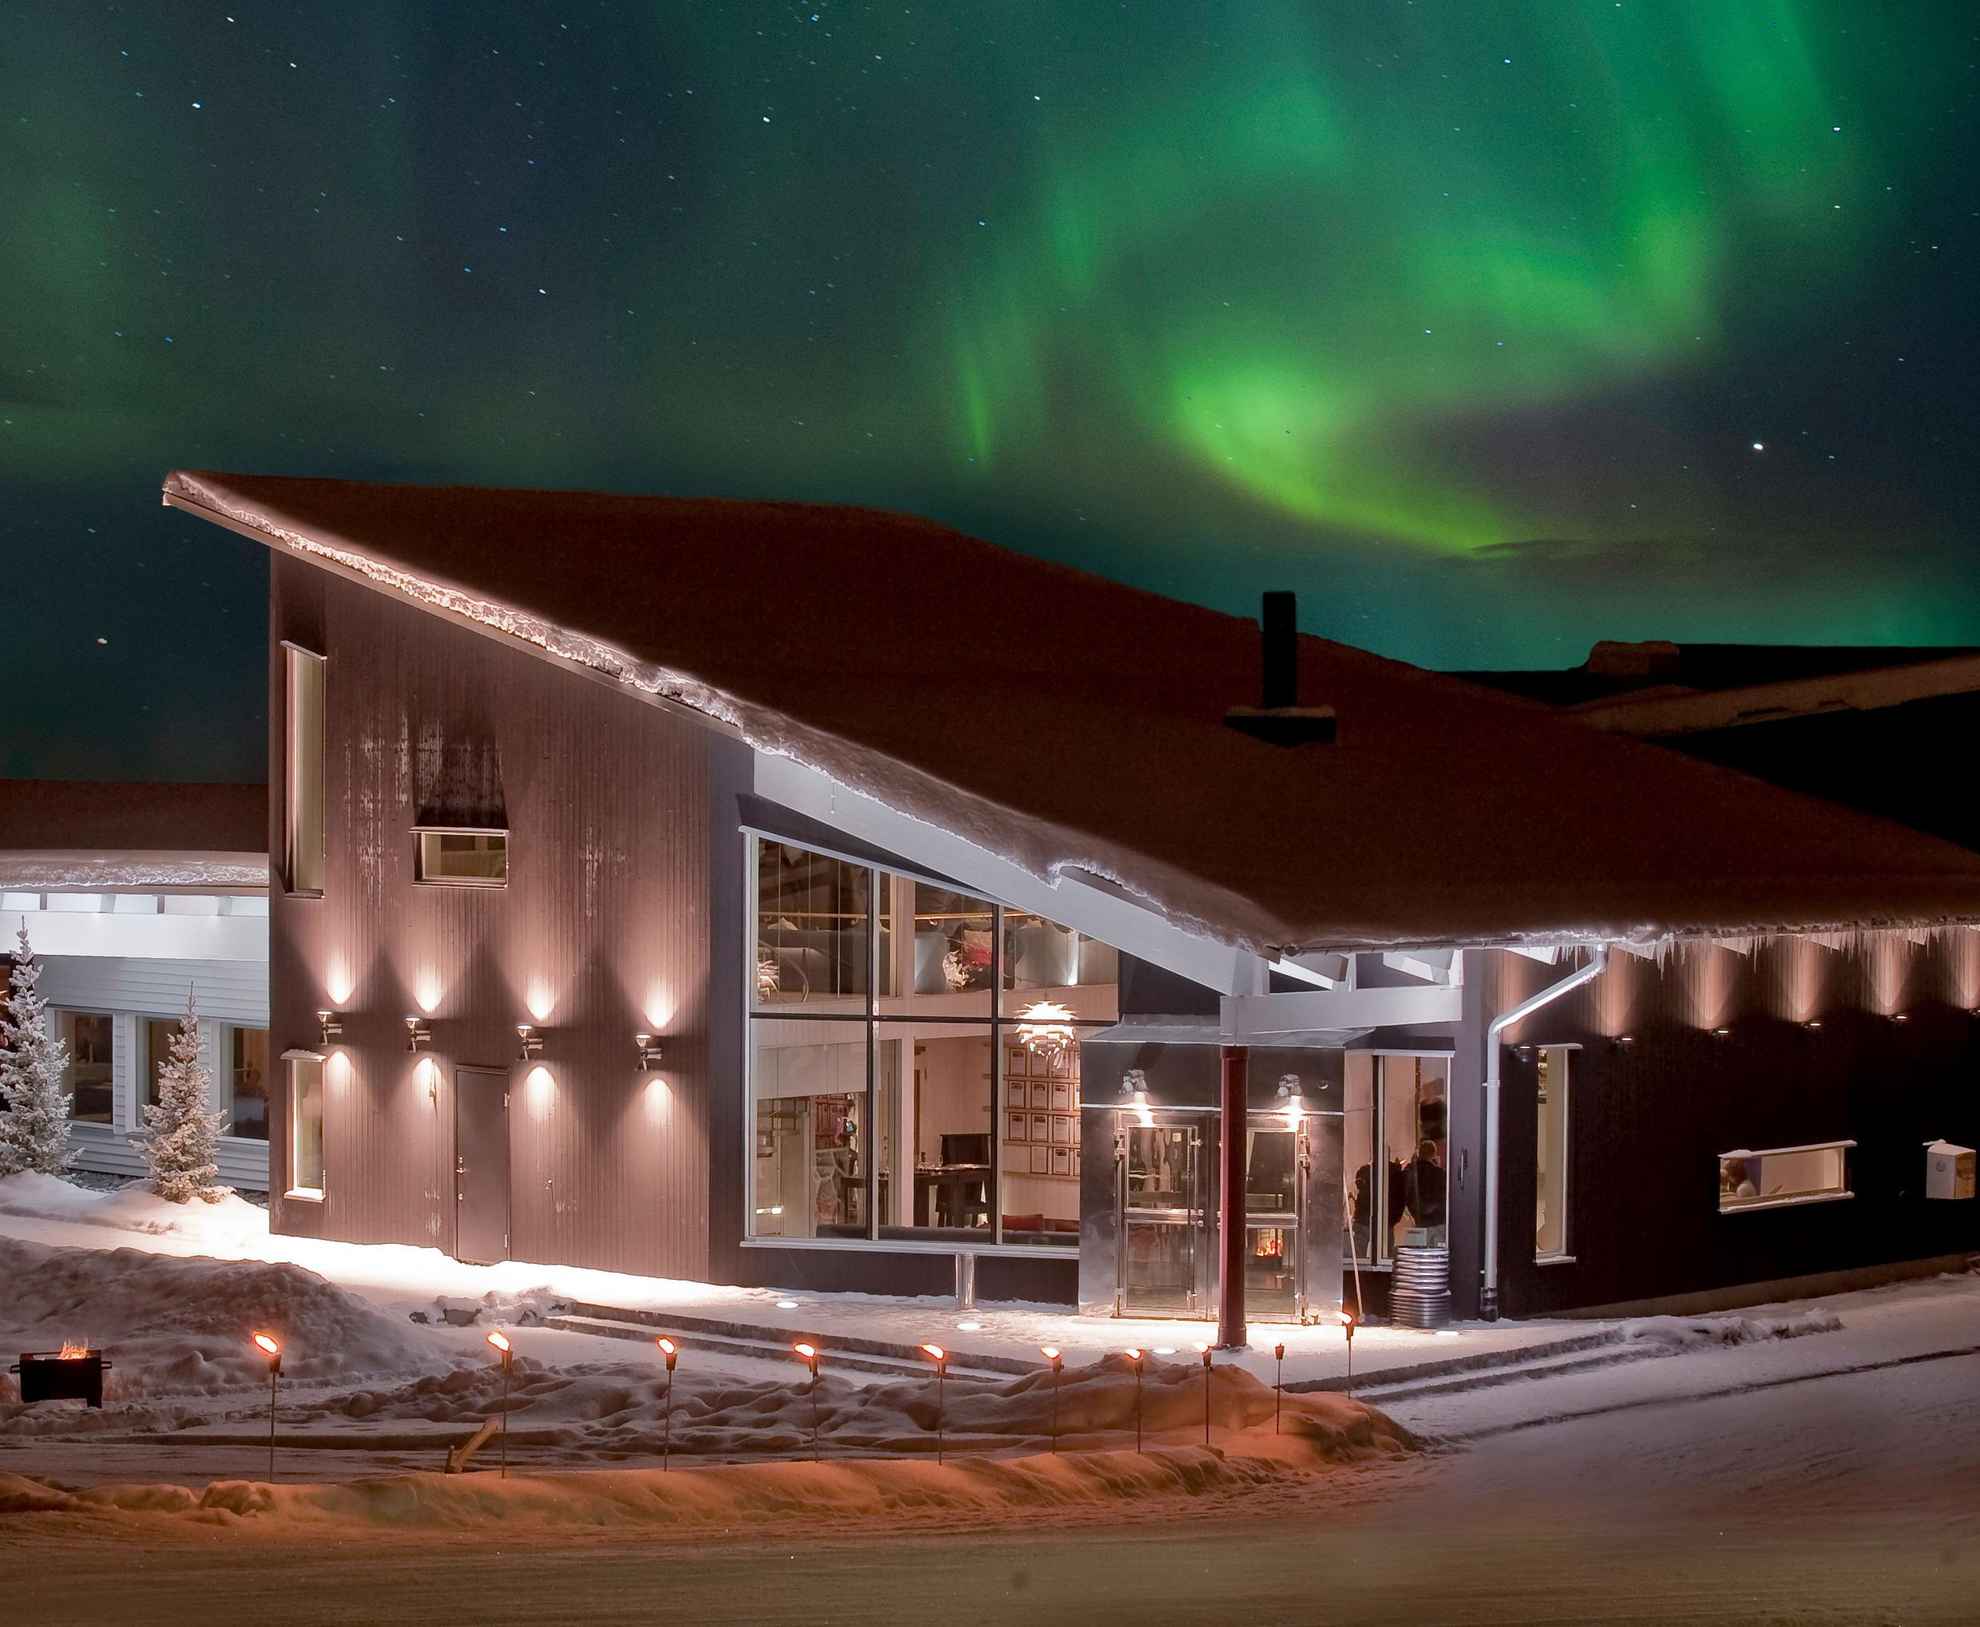 The northern lights is in the sky above a house during night time in winter.